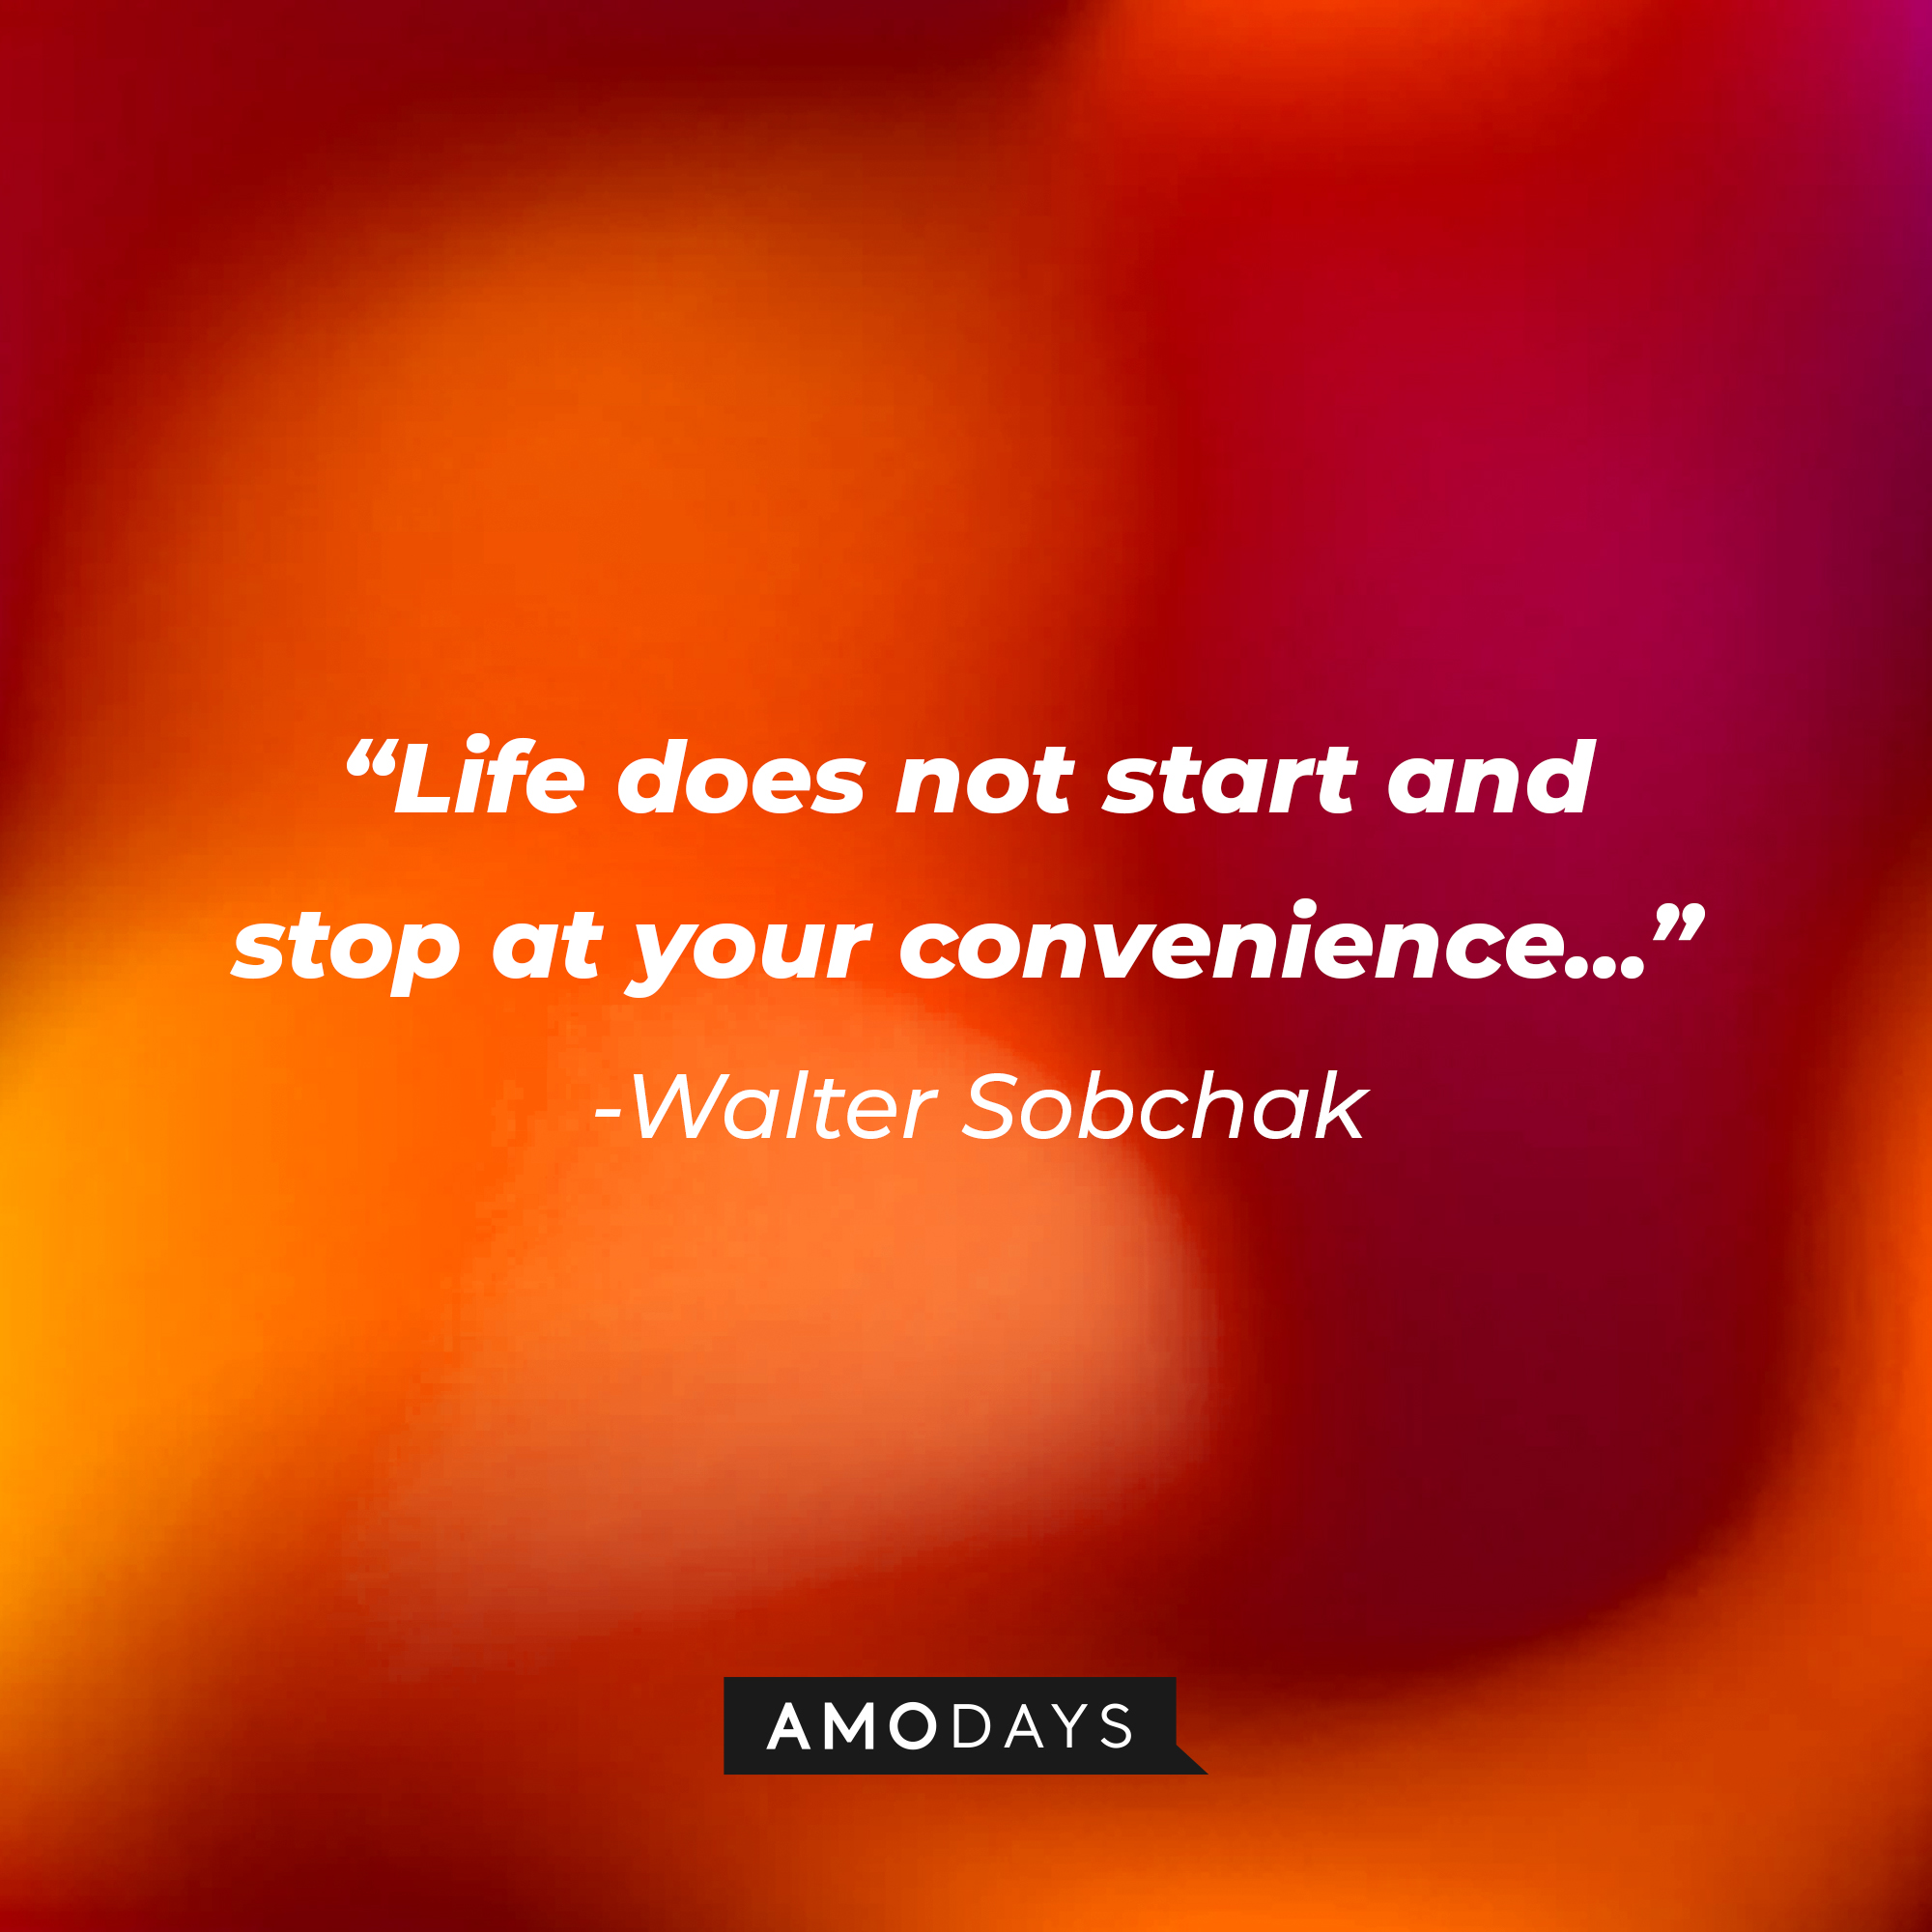 Walter Sobchak’s quote: “Life does not start and stop at your convenience...”  | Source: AmoDays